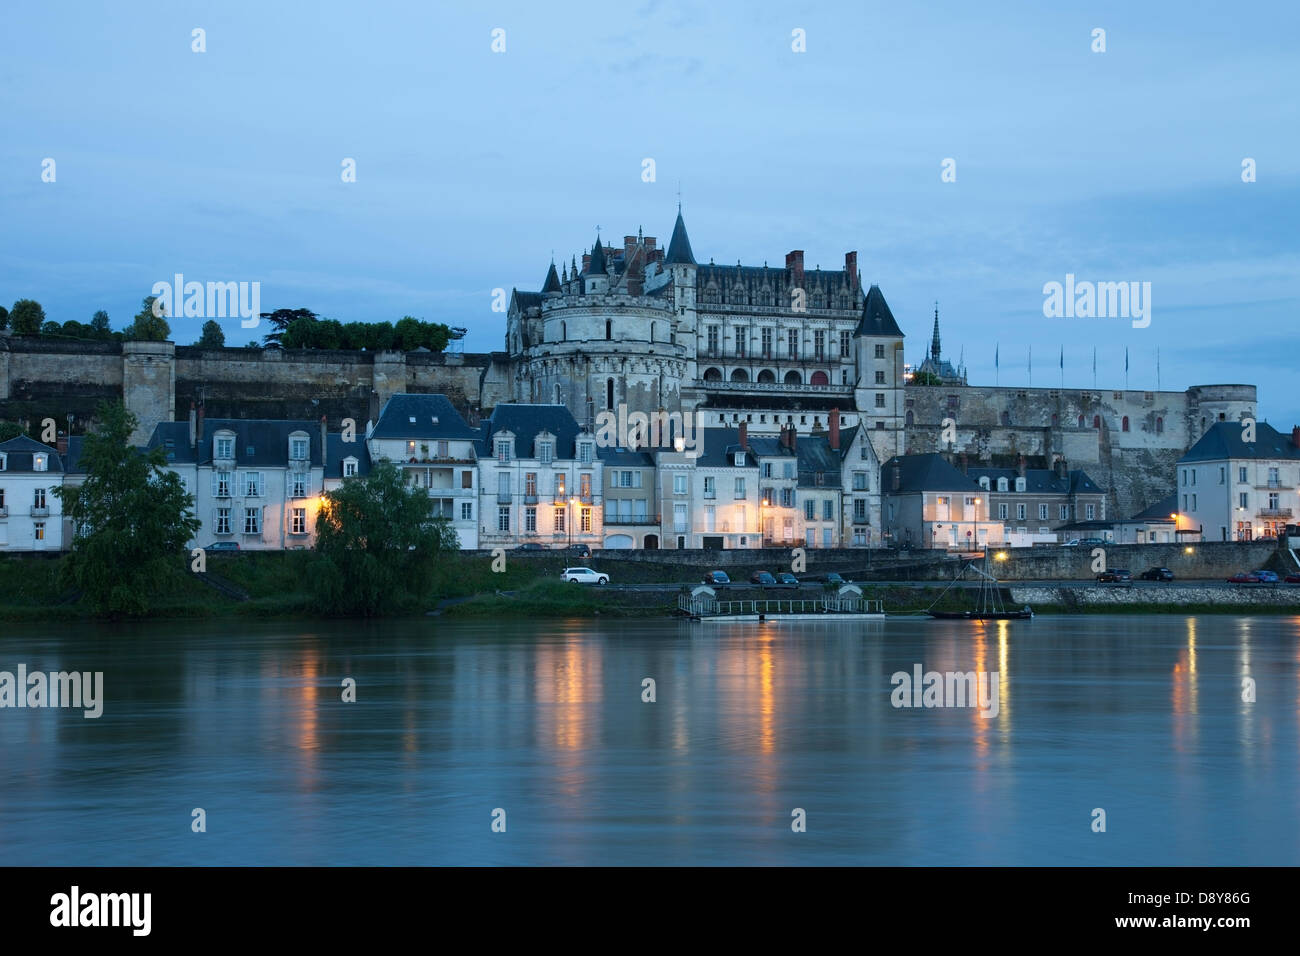 The Chateau and Lights of the Village Amboise Across the Loire River at Night, Indre et Loire Region of France Europe Stock Photo